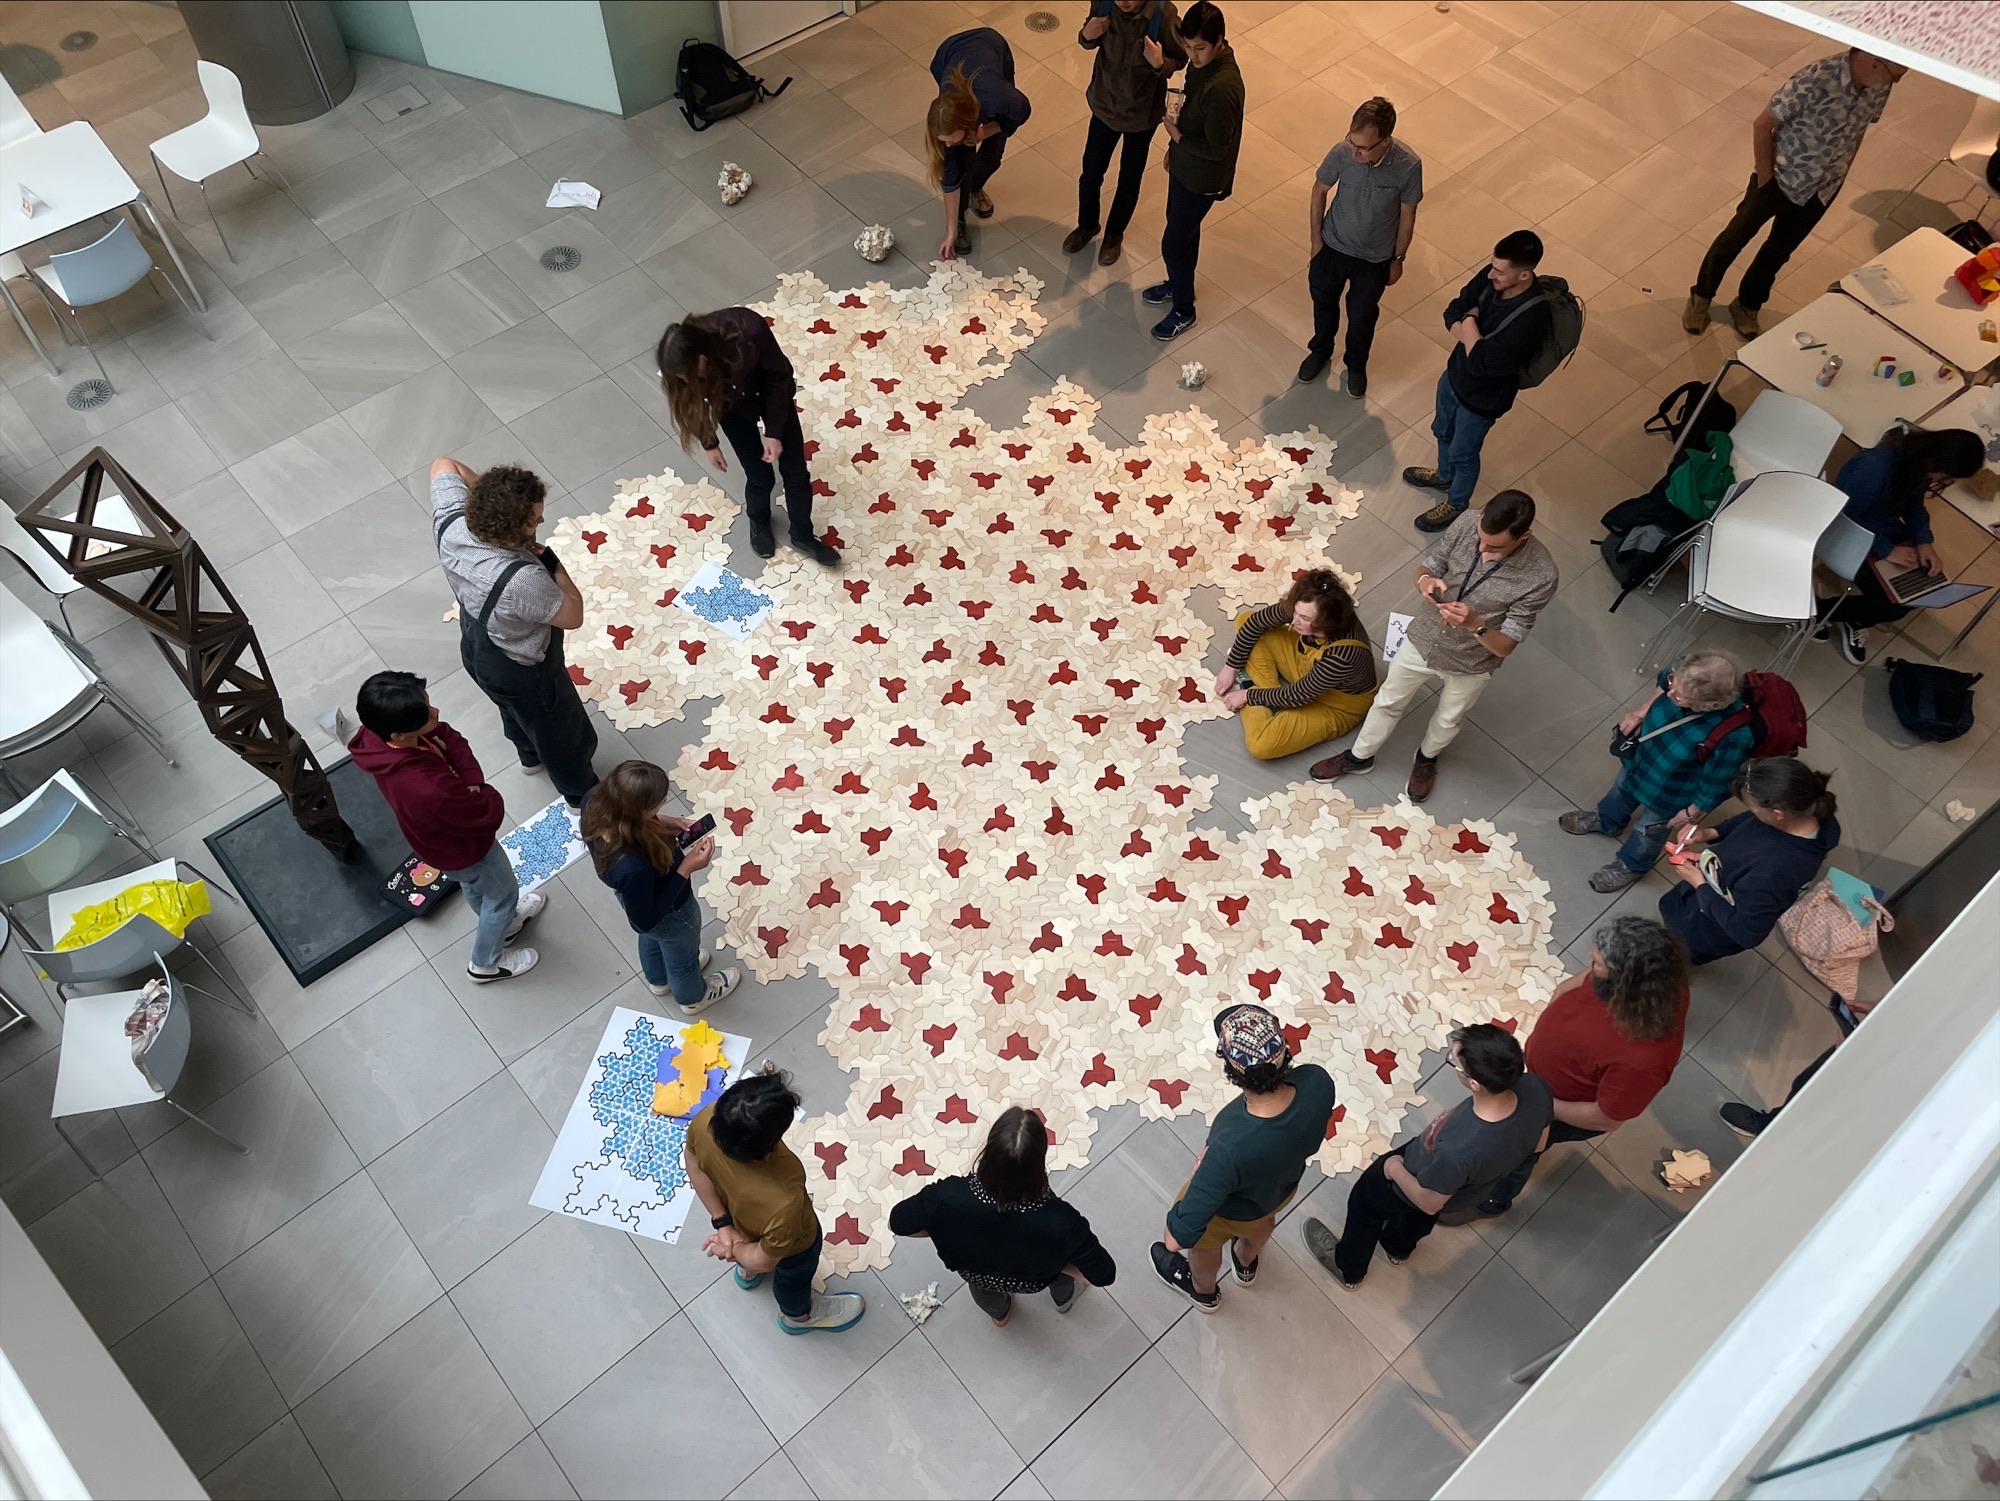 Photo of tiling being built by a group of people